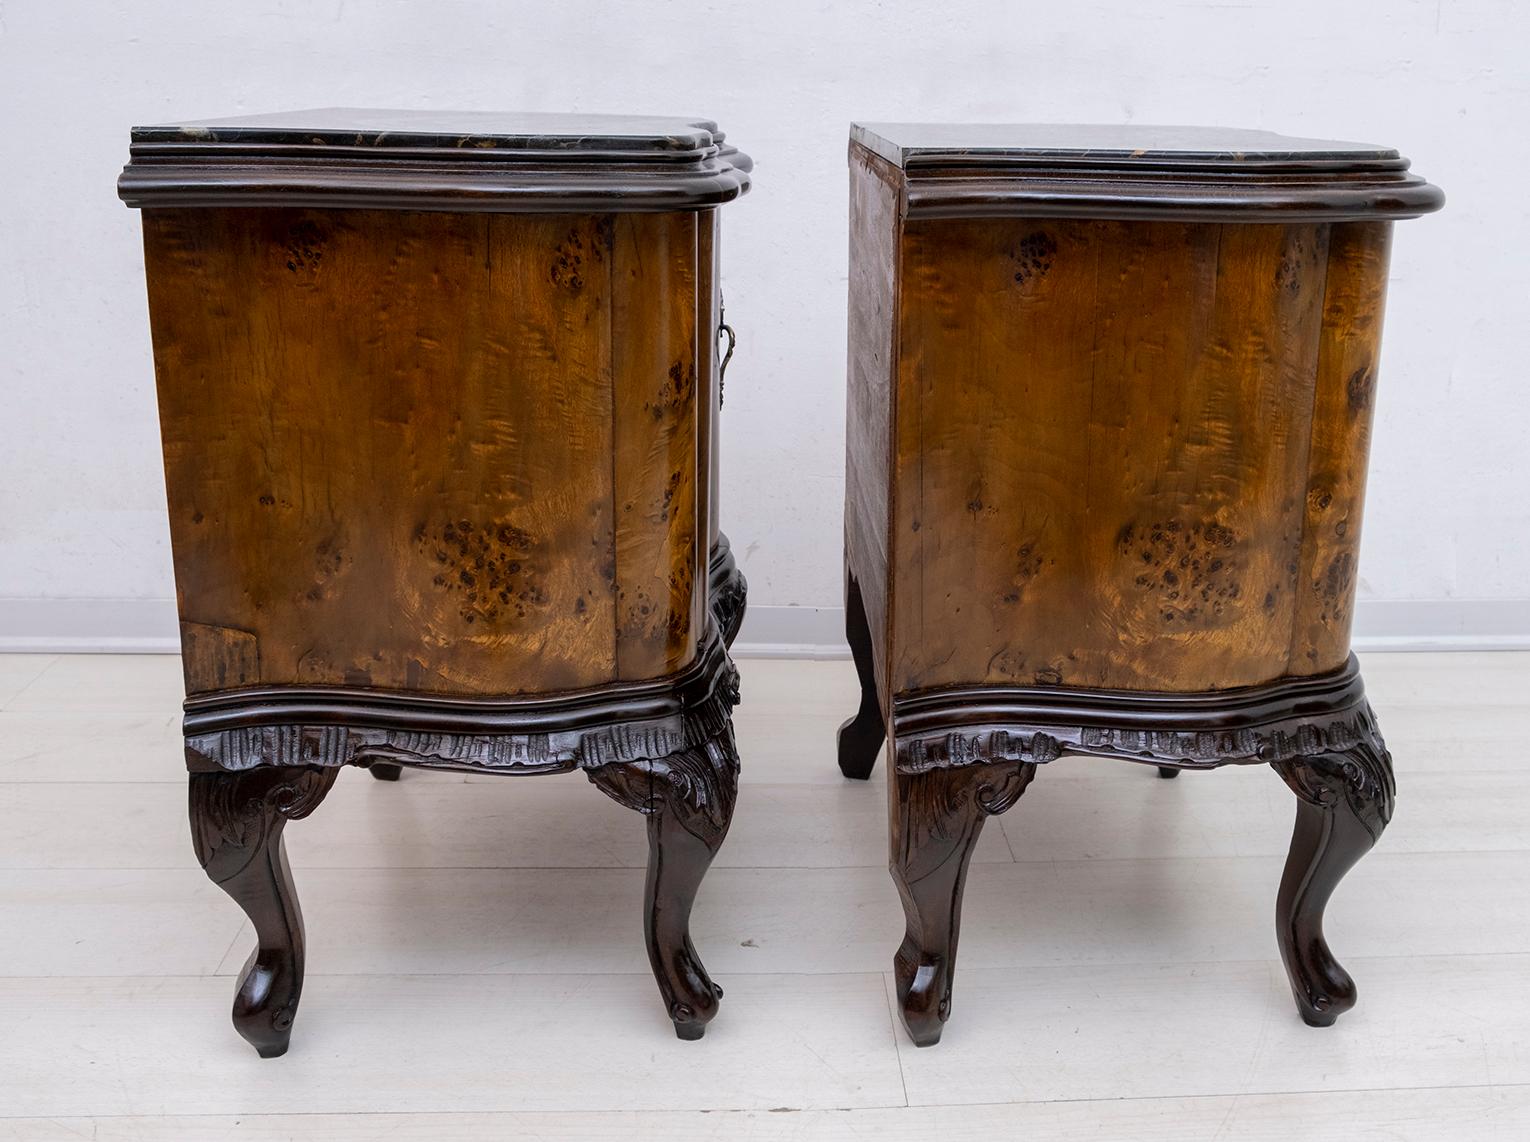 Early 20th Century Pair of Art Deco Italian Walnut and Black Marquinia Marble Bedside Tables, 1920s